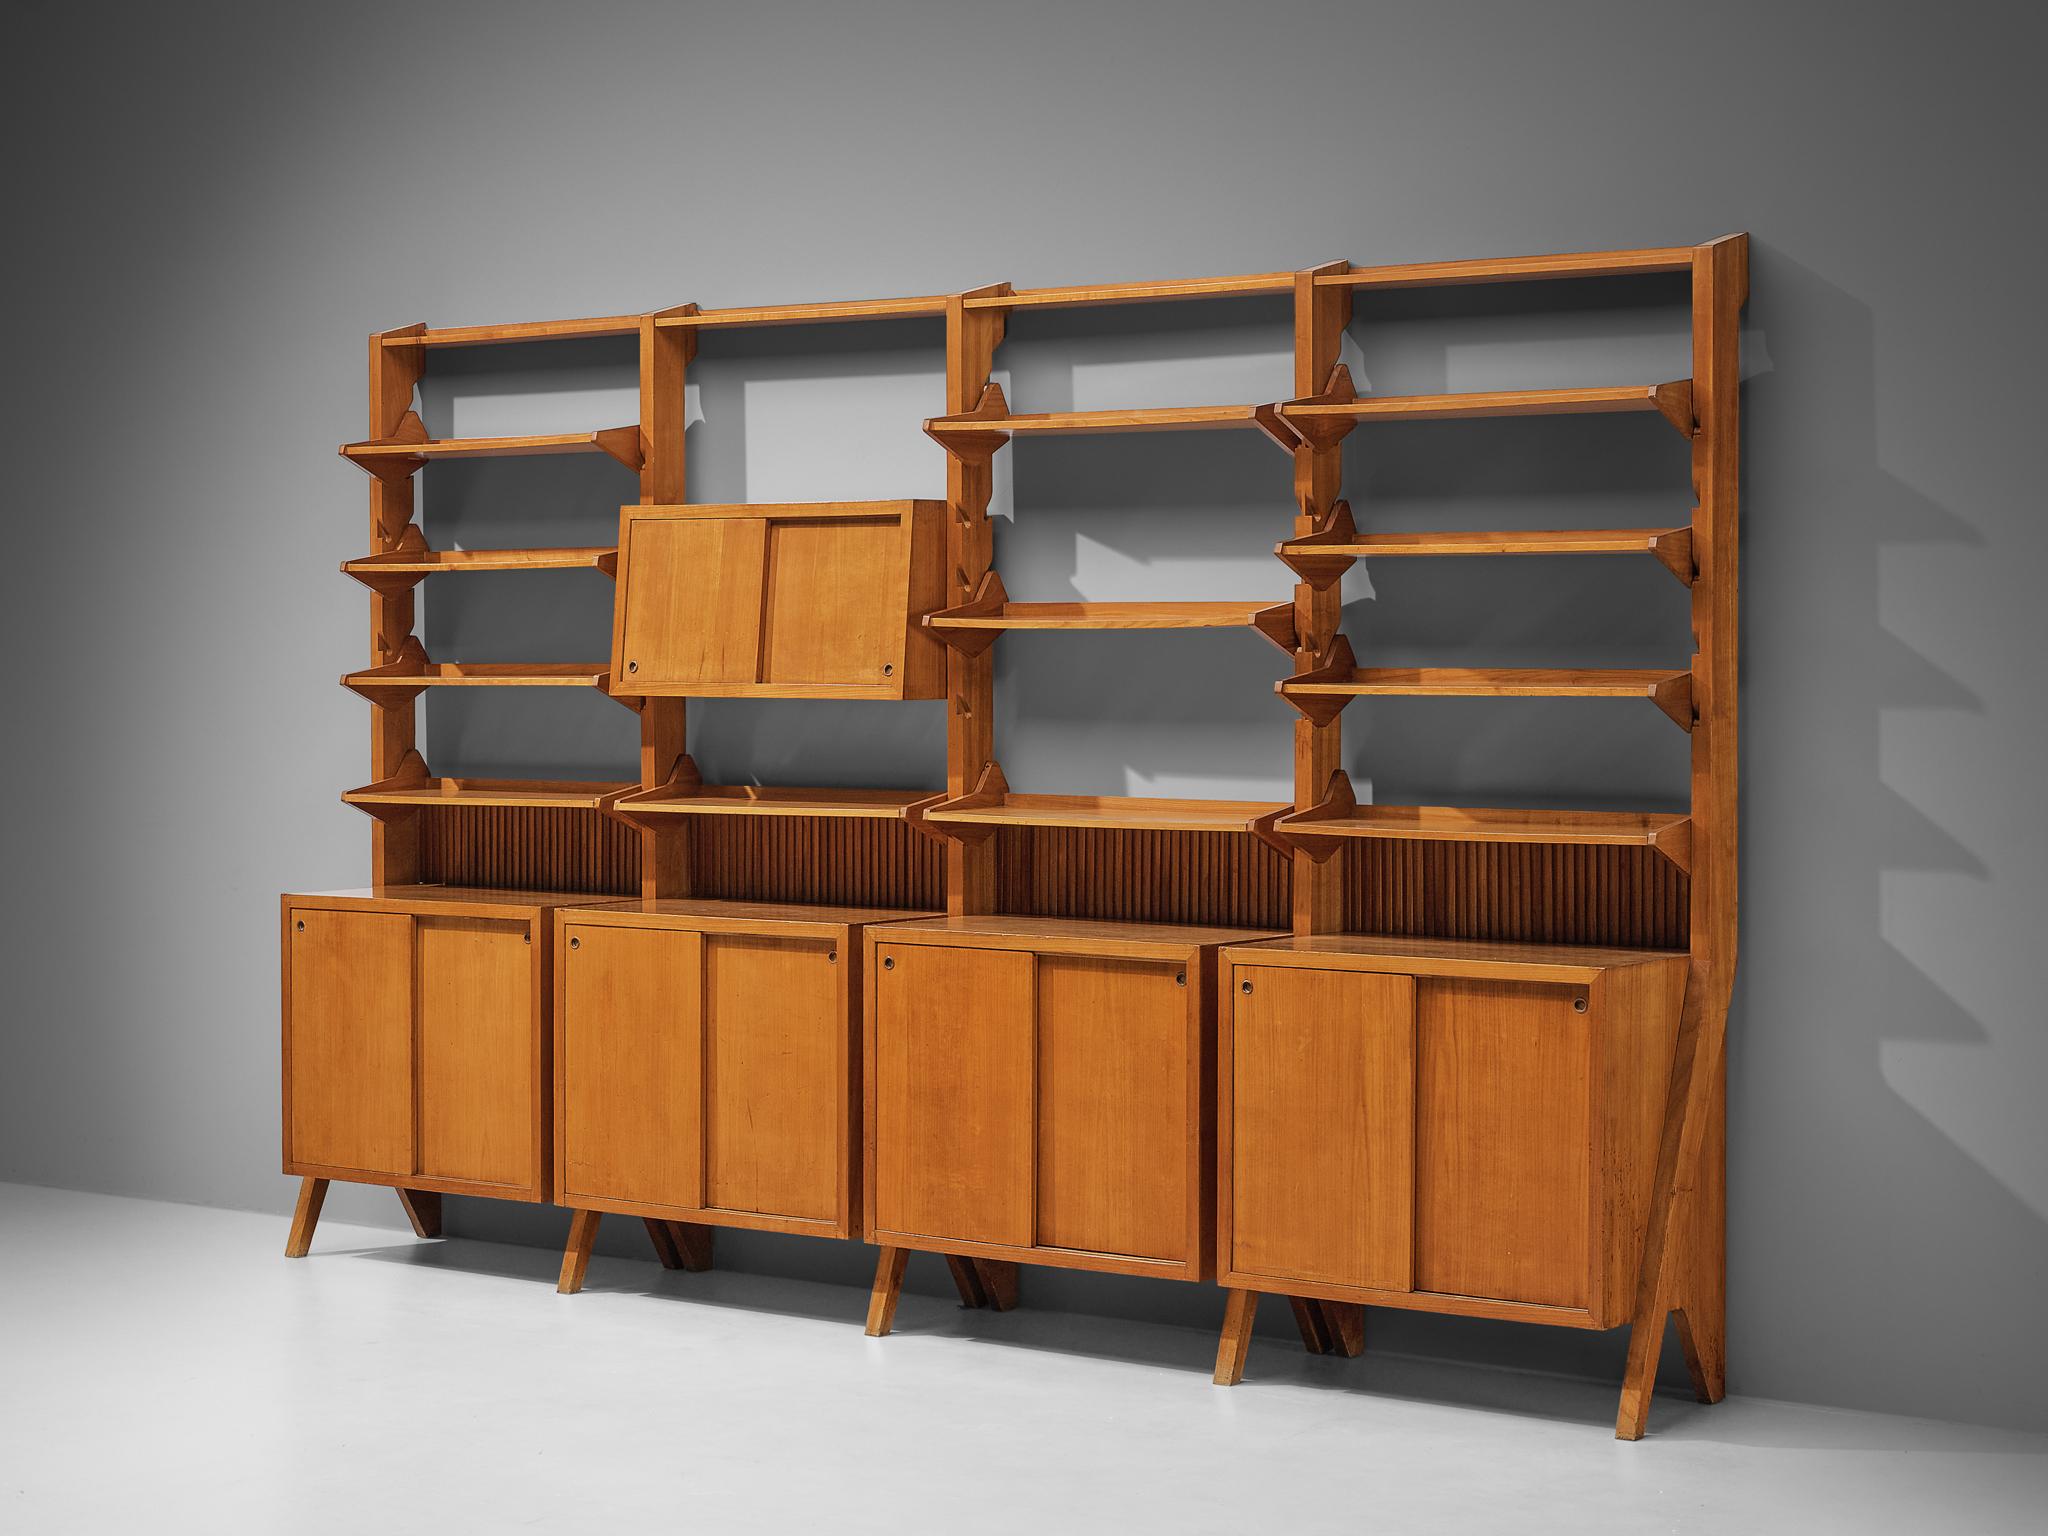 Freestanding wall unit or library, cherry, Italy, 1960s

Made by a skilled craftsman in Italy, this exceptional library unit excels in its form and composition. The bookcase reflects the design principles of the midcentury era that rose to